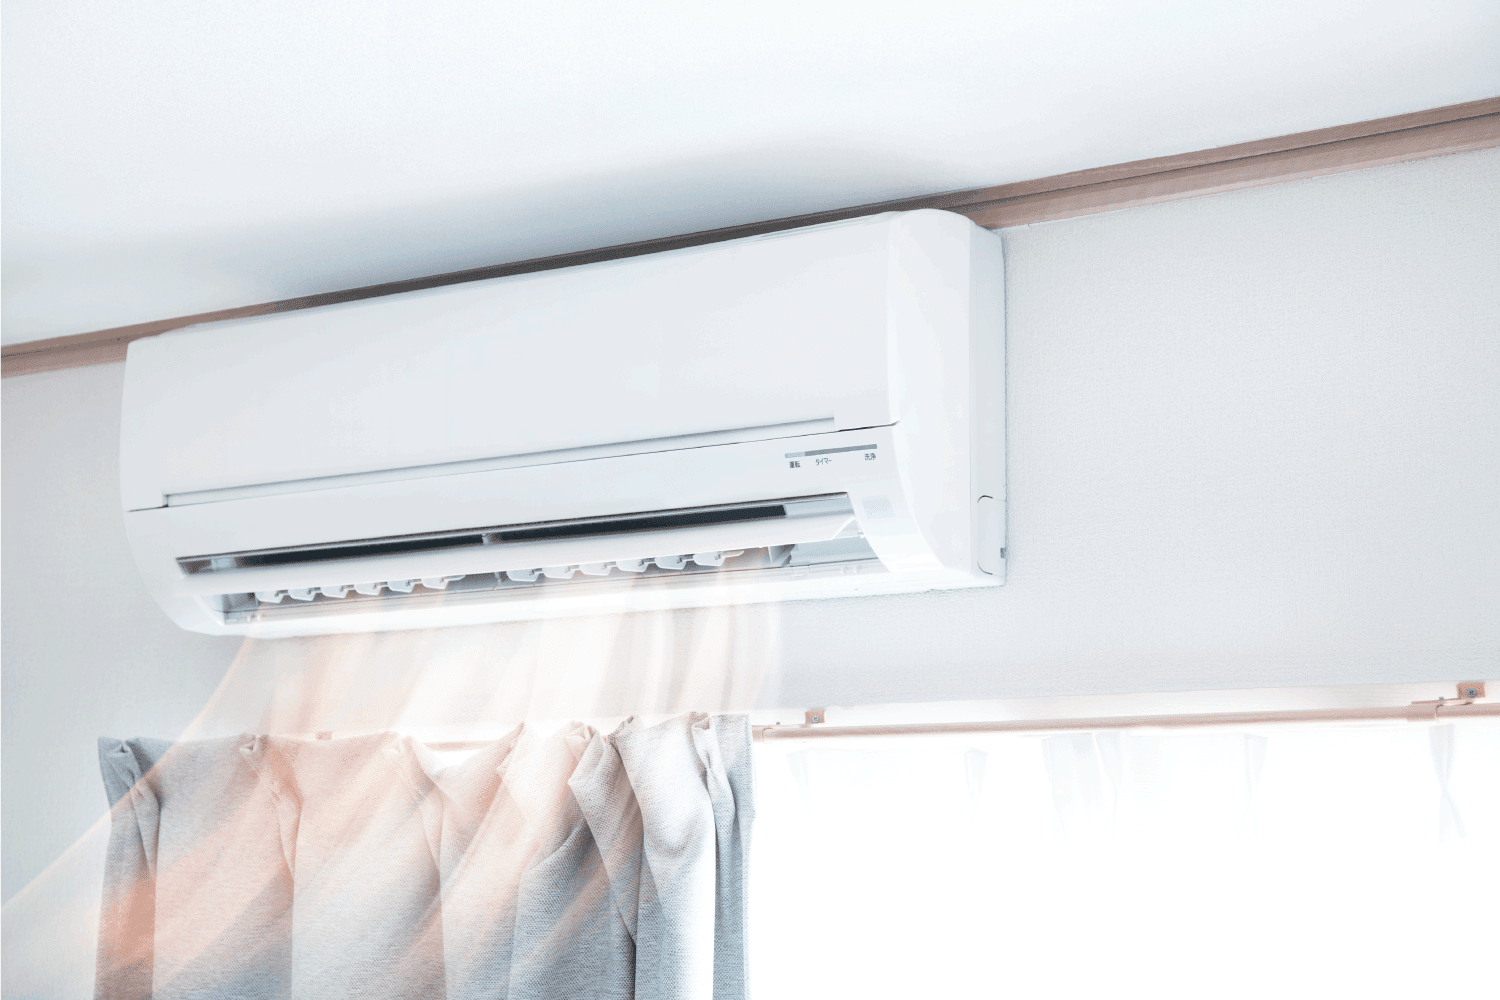 split type air conditioner blowing air into a room